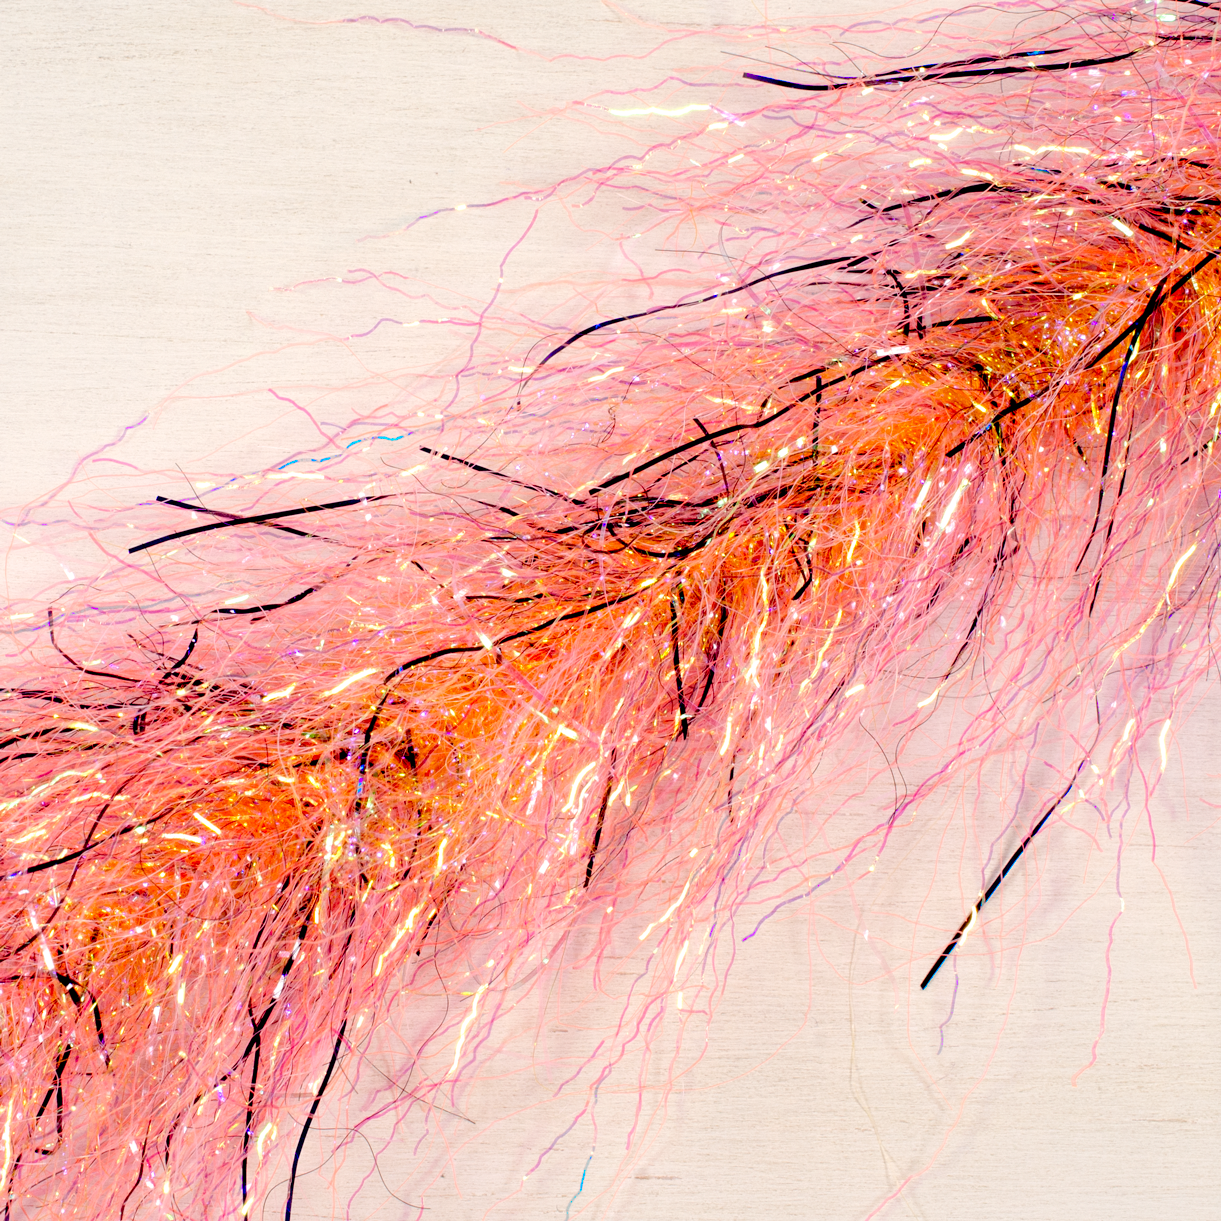 Sea Run Shrimp Pink 5D Brush Diagonal. This brush is slighly narrower than other 5D brushes, and the black bits make this brush interesting to inshore shimp eaters like snook, redfish, and sea trout.